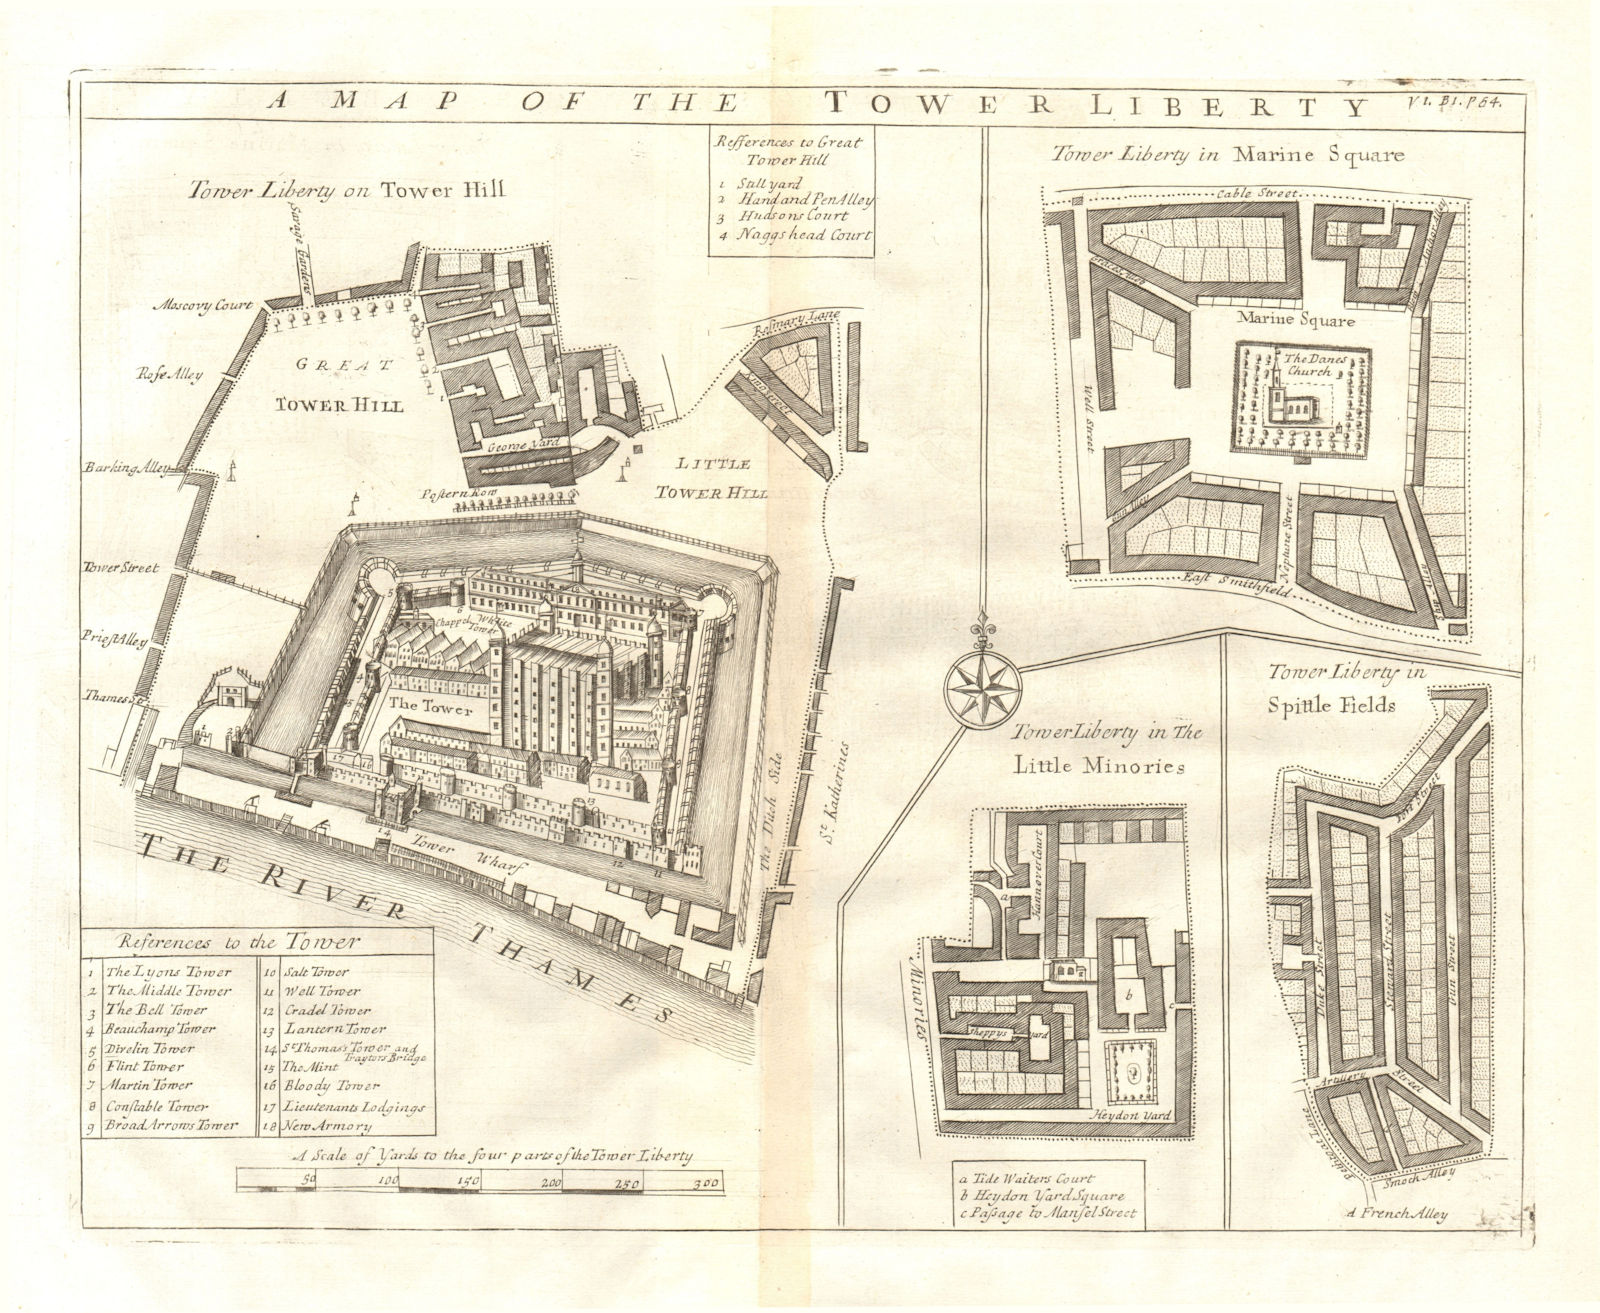 'Map of the the Tower Liberty'. Tower of London/Tower Hill. STOW/STRYPE 1720